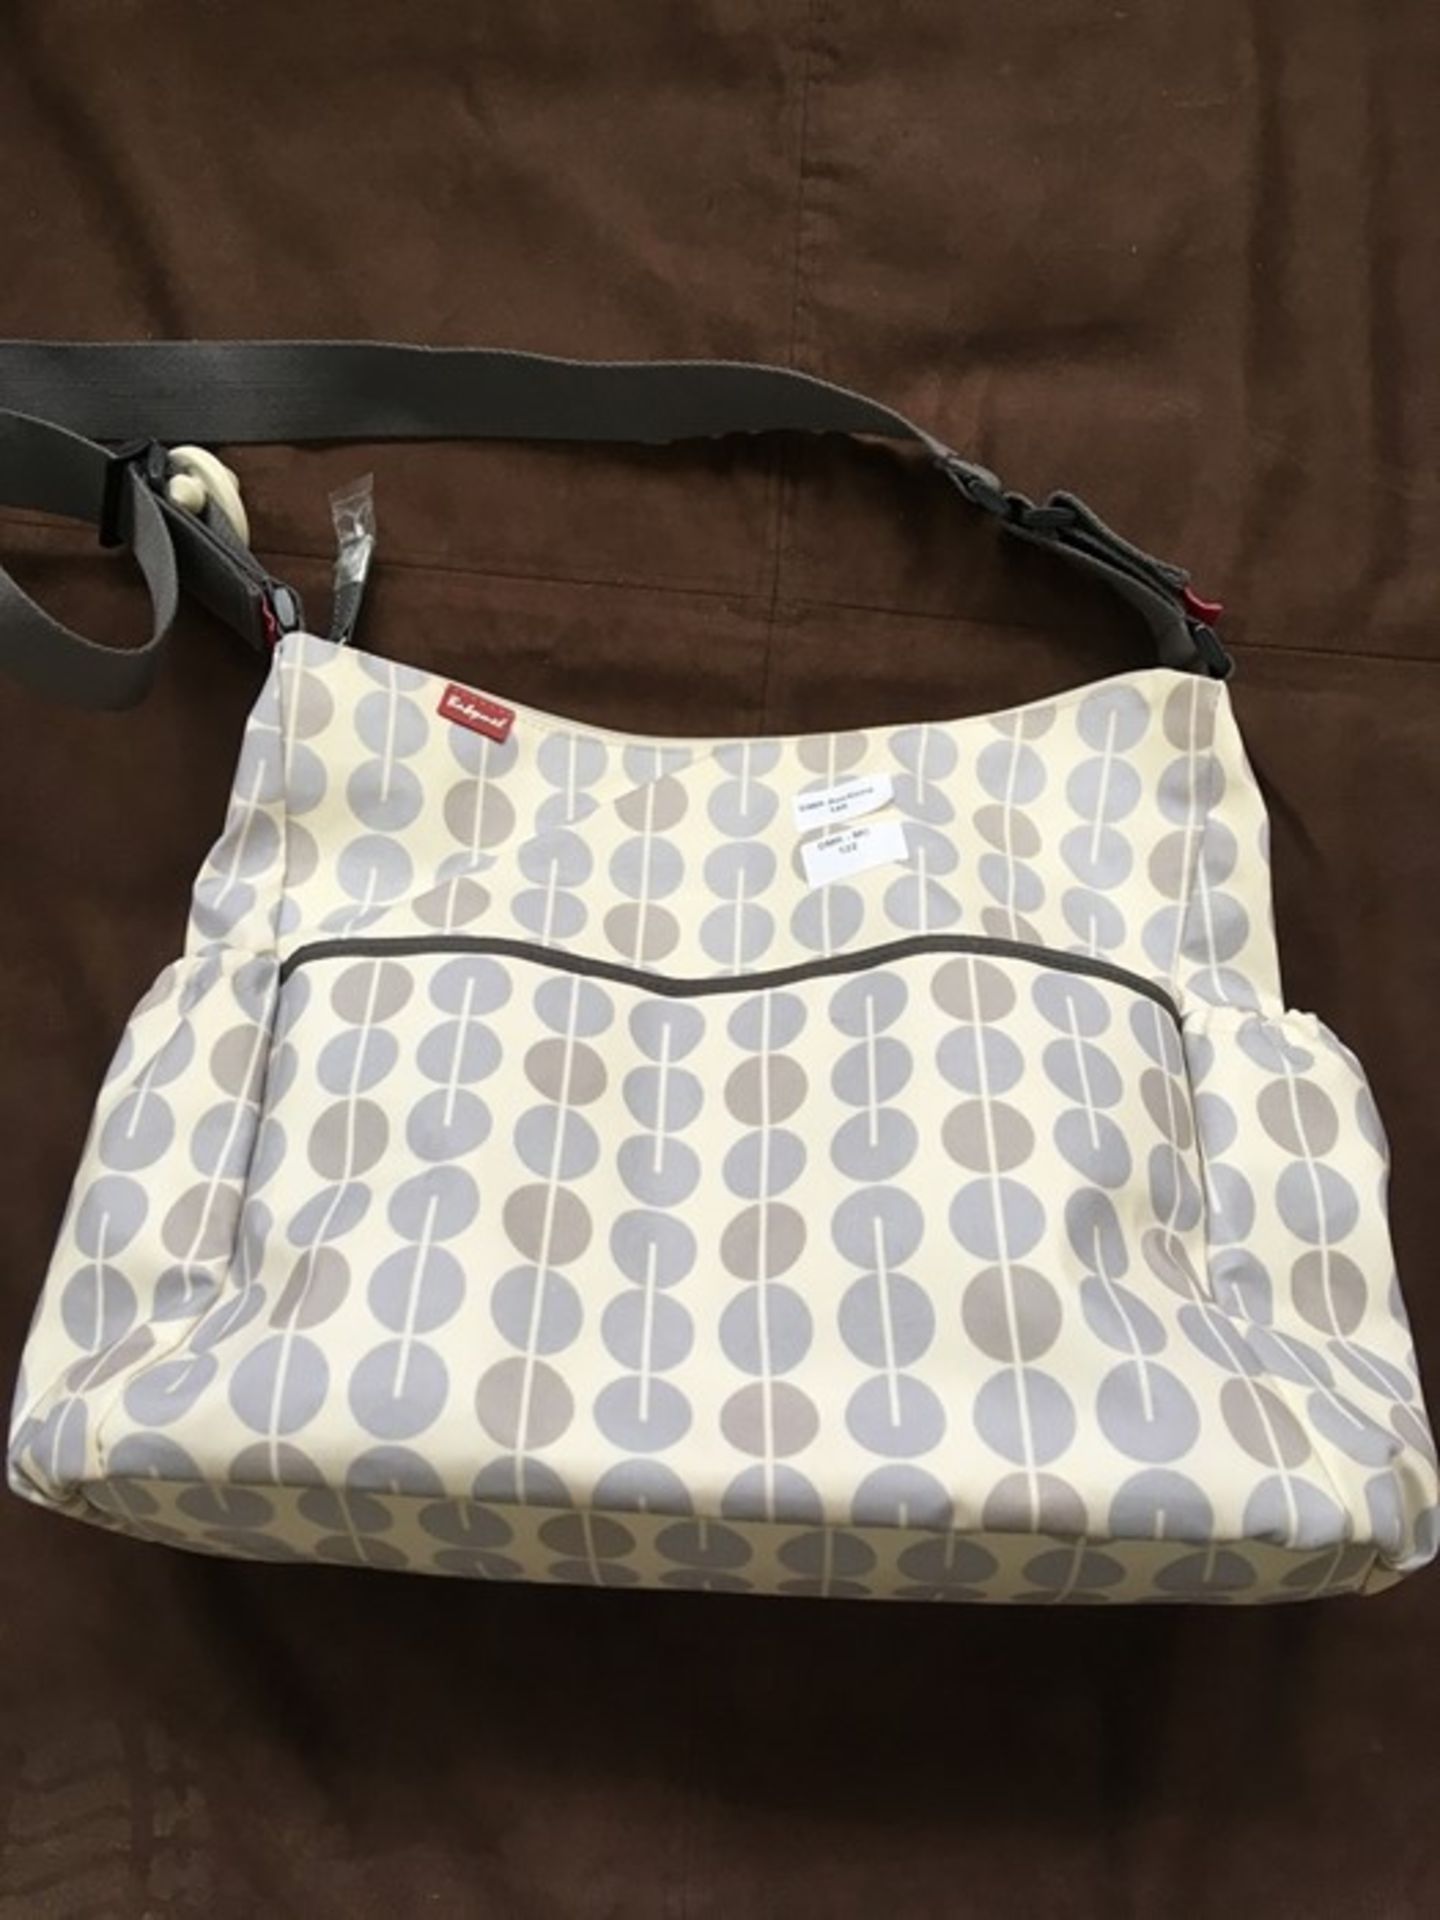 1 BABYMEL HAND BAG / RRP £60.00 (PUBLIC VIEWING AVAILABLE)